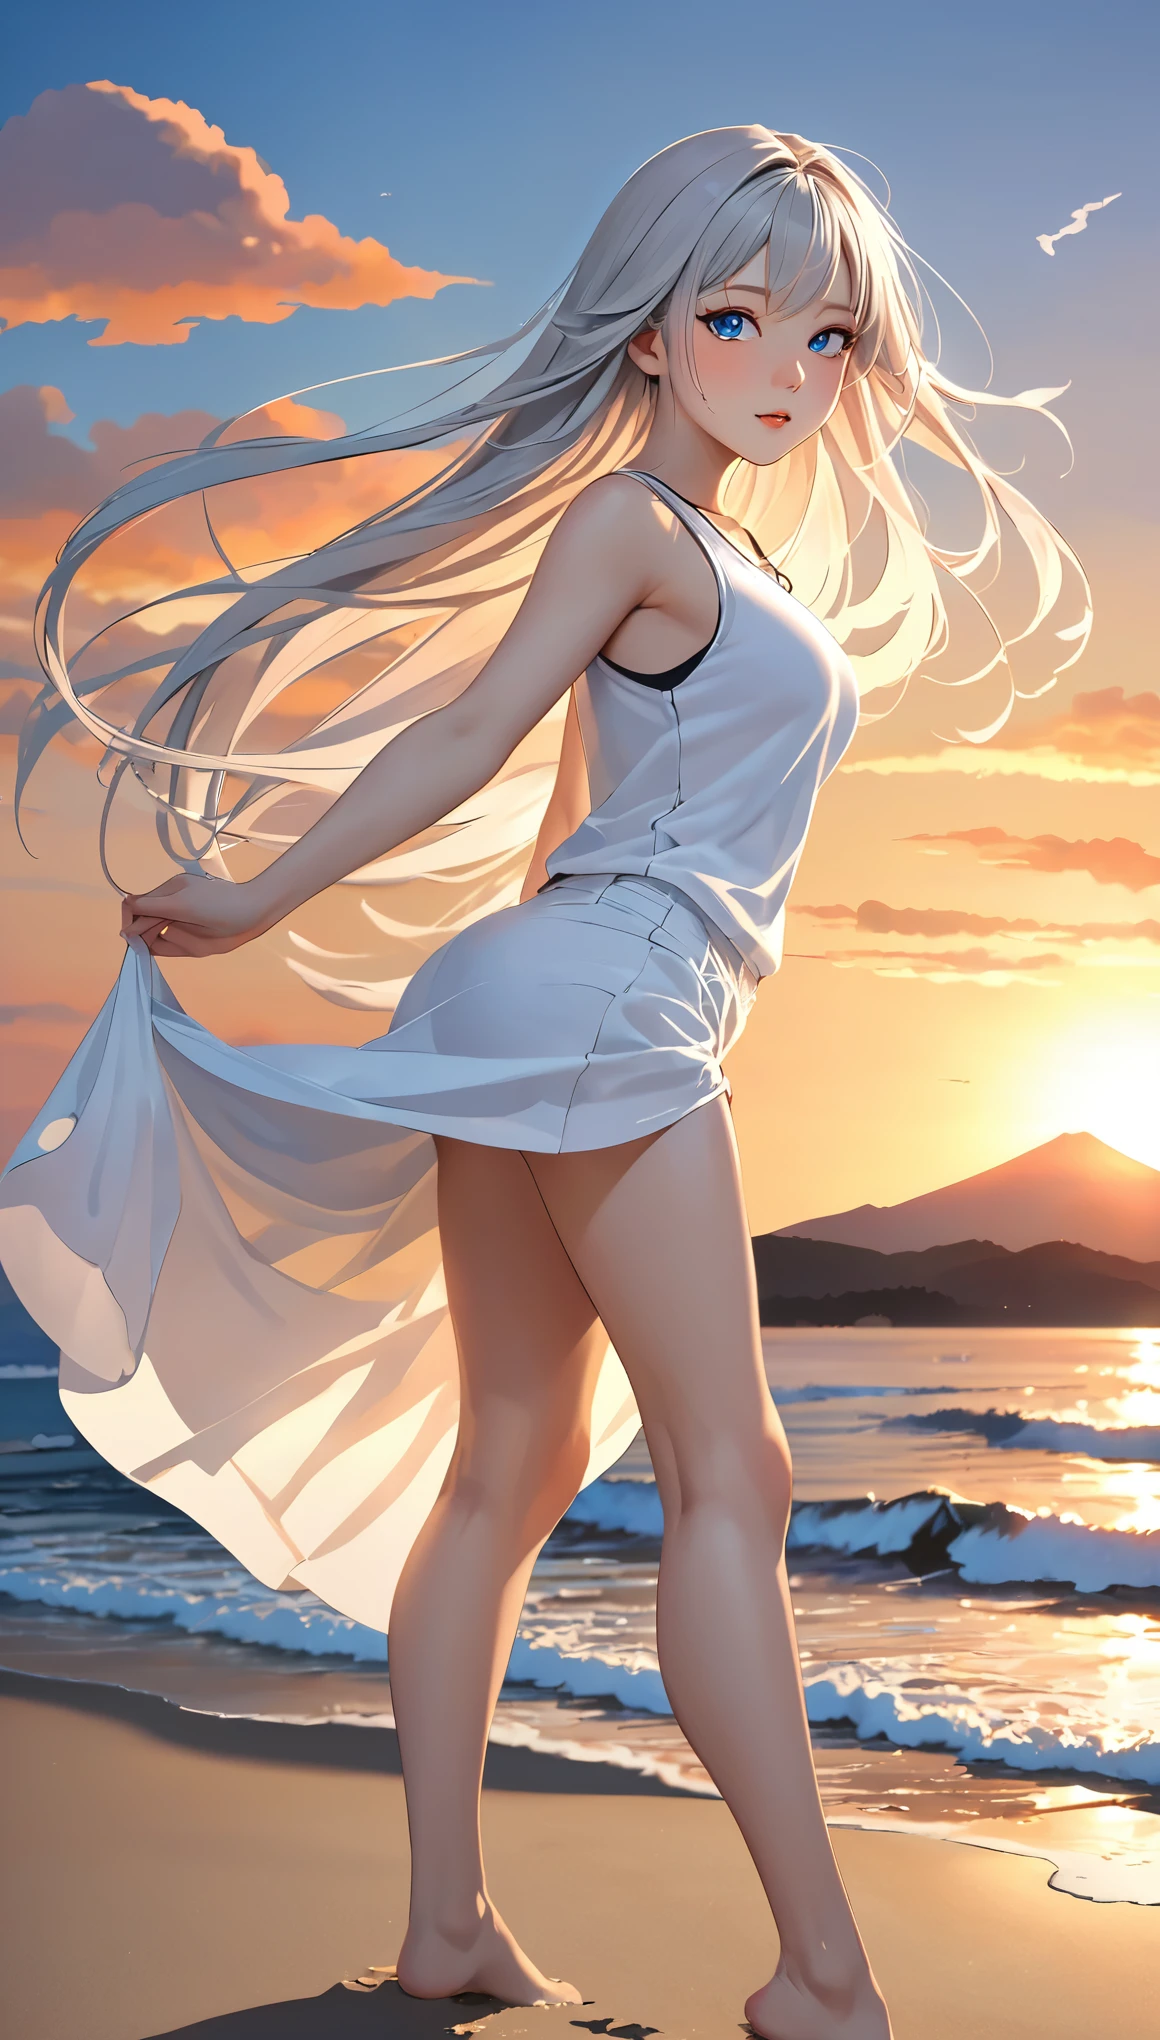 Highest quality, Super quality, 16K, Incredibly absurd, Very detailed, 2.5D, delicate and dynamic, blue sky, Calm sea, Sandy Beach, Sunset, sunset, Enoshima, Fuji Mountain, Small face, Extremely delicate facial expression, Delicate eye depiction, Extremely detailed hair, Upper body close-up, erotic, sole sexy Japanese lady, healthy shaped body, 22 years old lady, student,  huge firm bouncing busts, white silver long hair, sexy long legs, Glowing Skin, Soft Skin, Sleeveless white T-shirt, brown long skirt, barefoot, Standing backwards, Turn to the camera